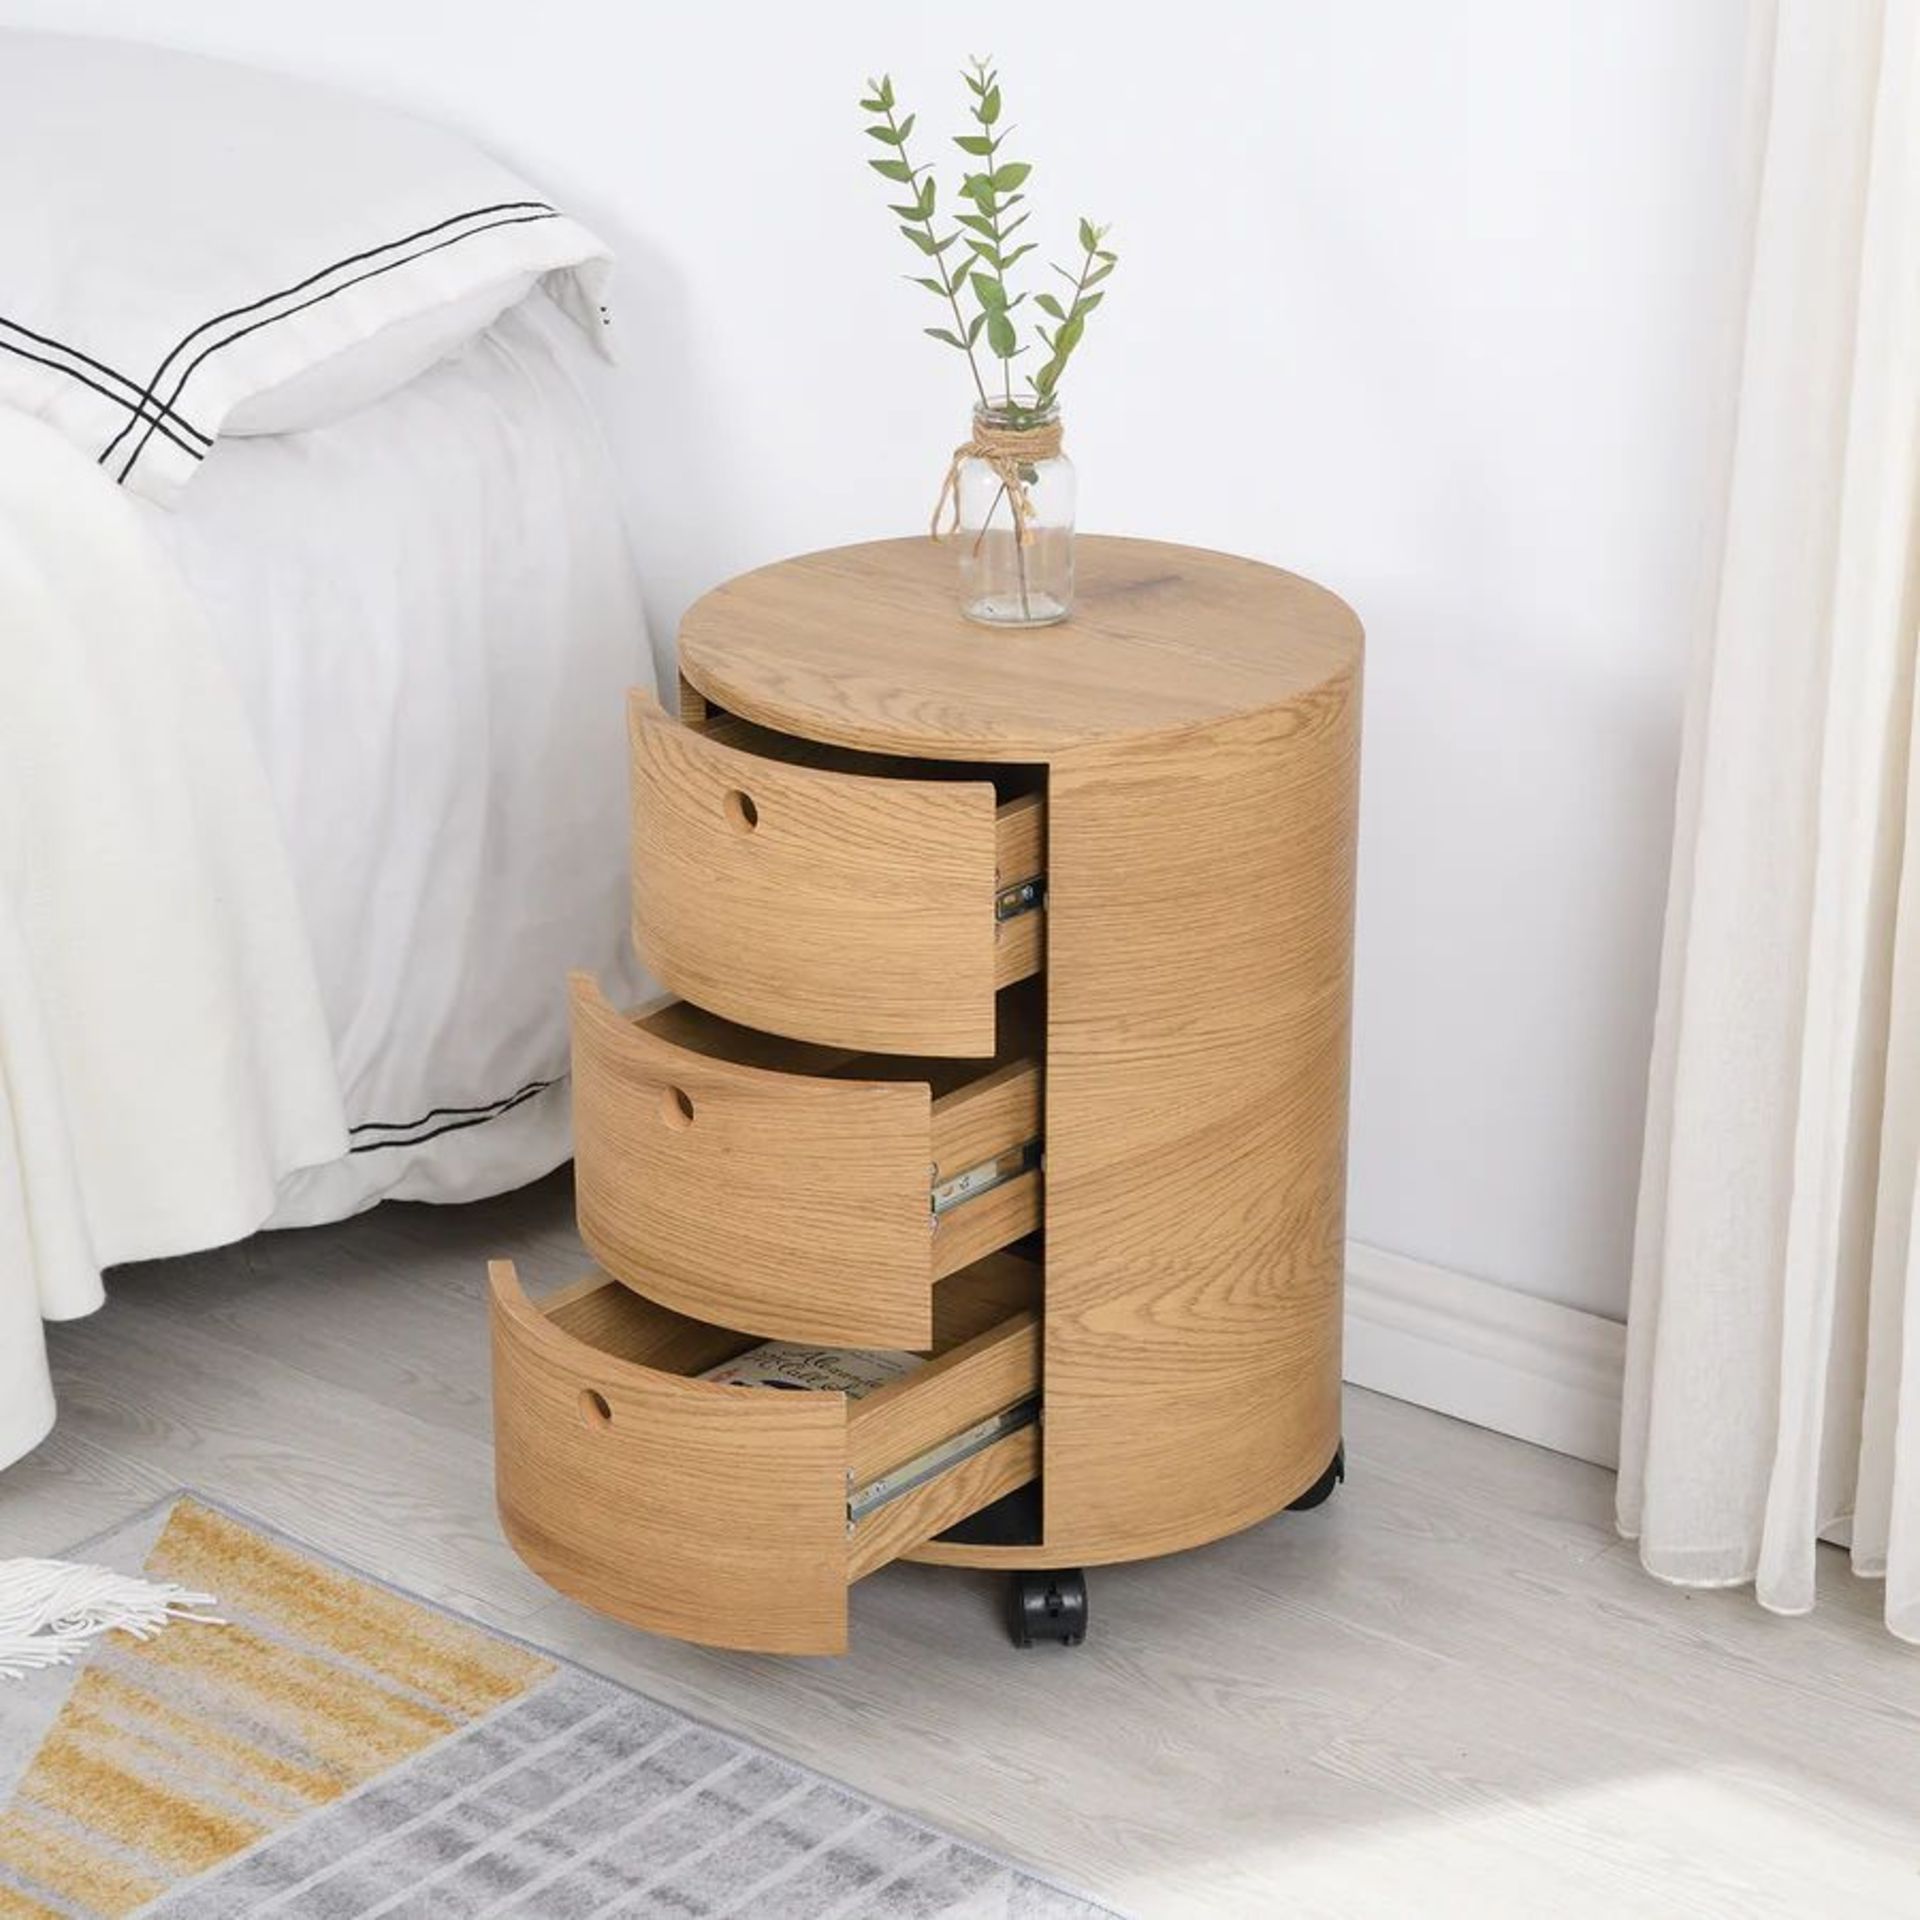 DOLIO Drum Chest Bedside Table, Barrel Side Table with Drawers Oak 3 Drawer. - R19.1. RRP £219.99. - Image 2 of 2